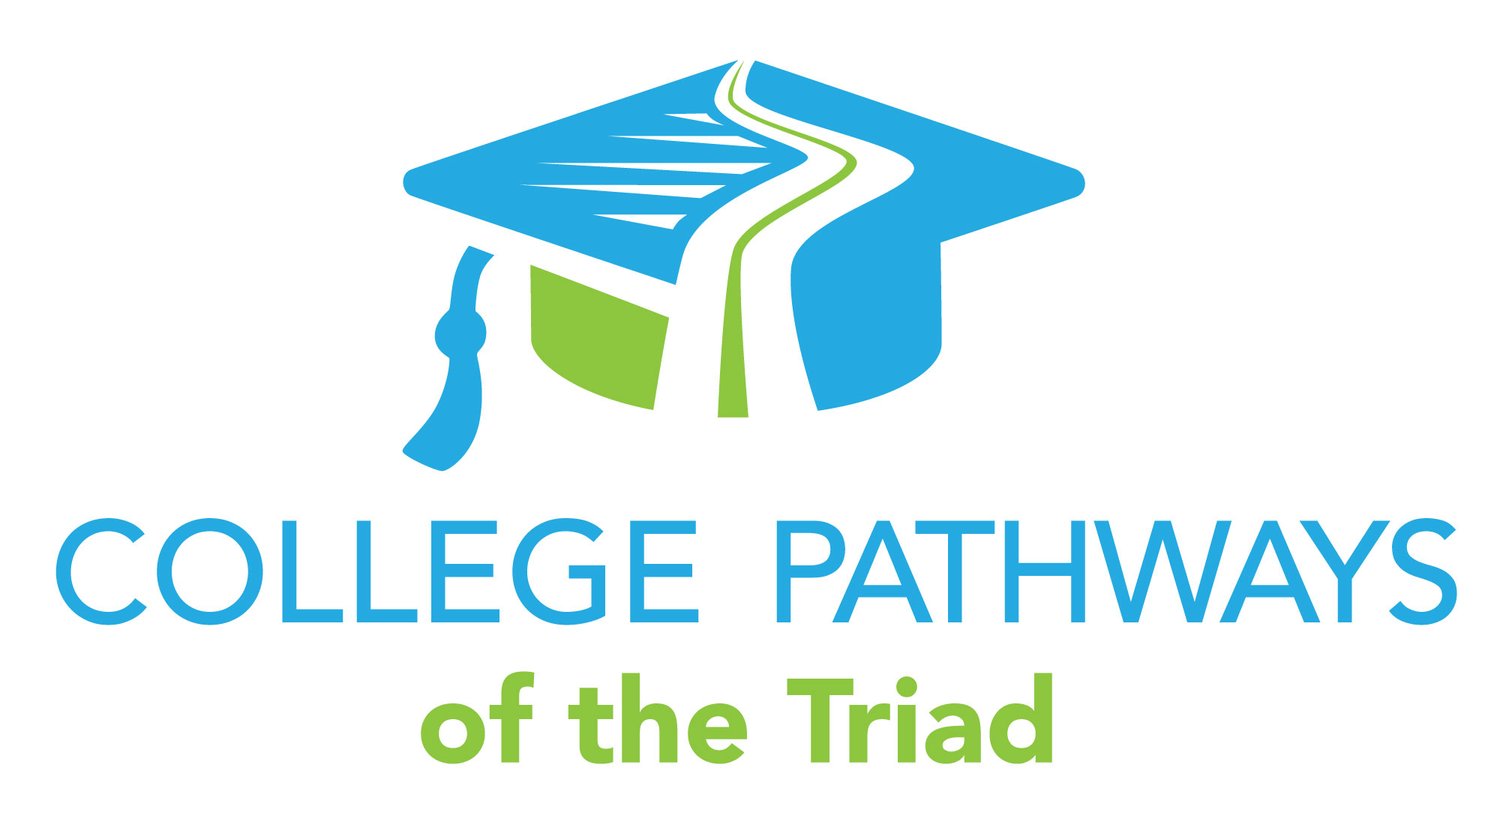 College Pathways of the Triad